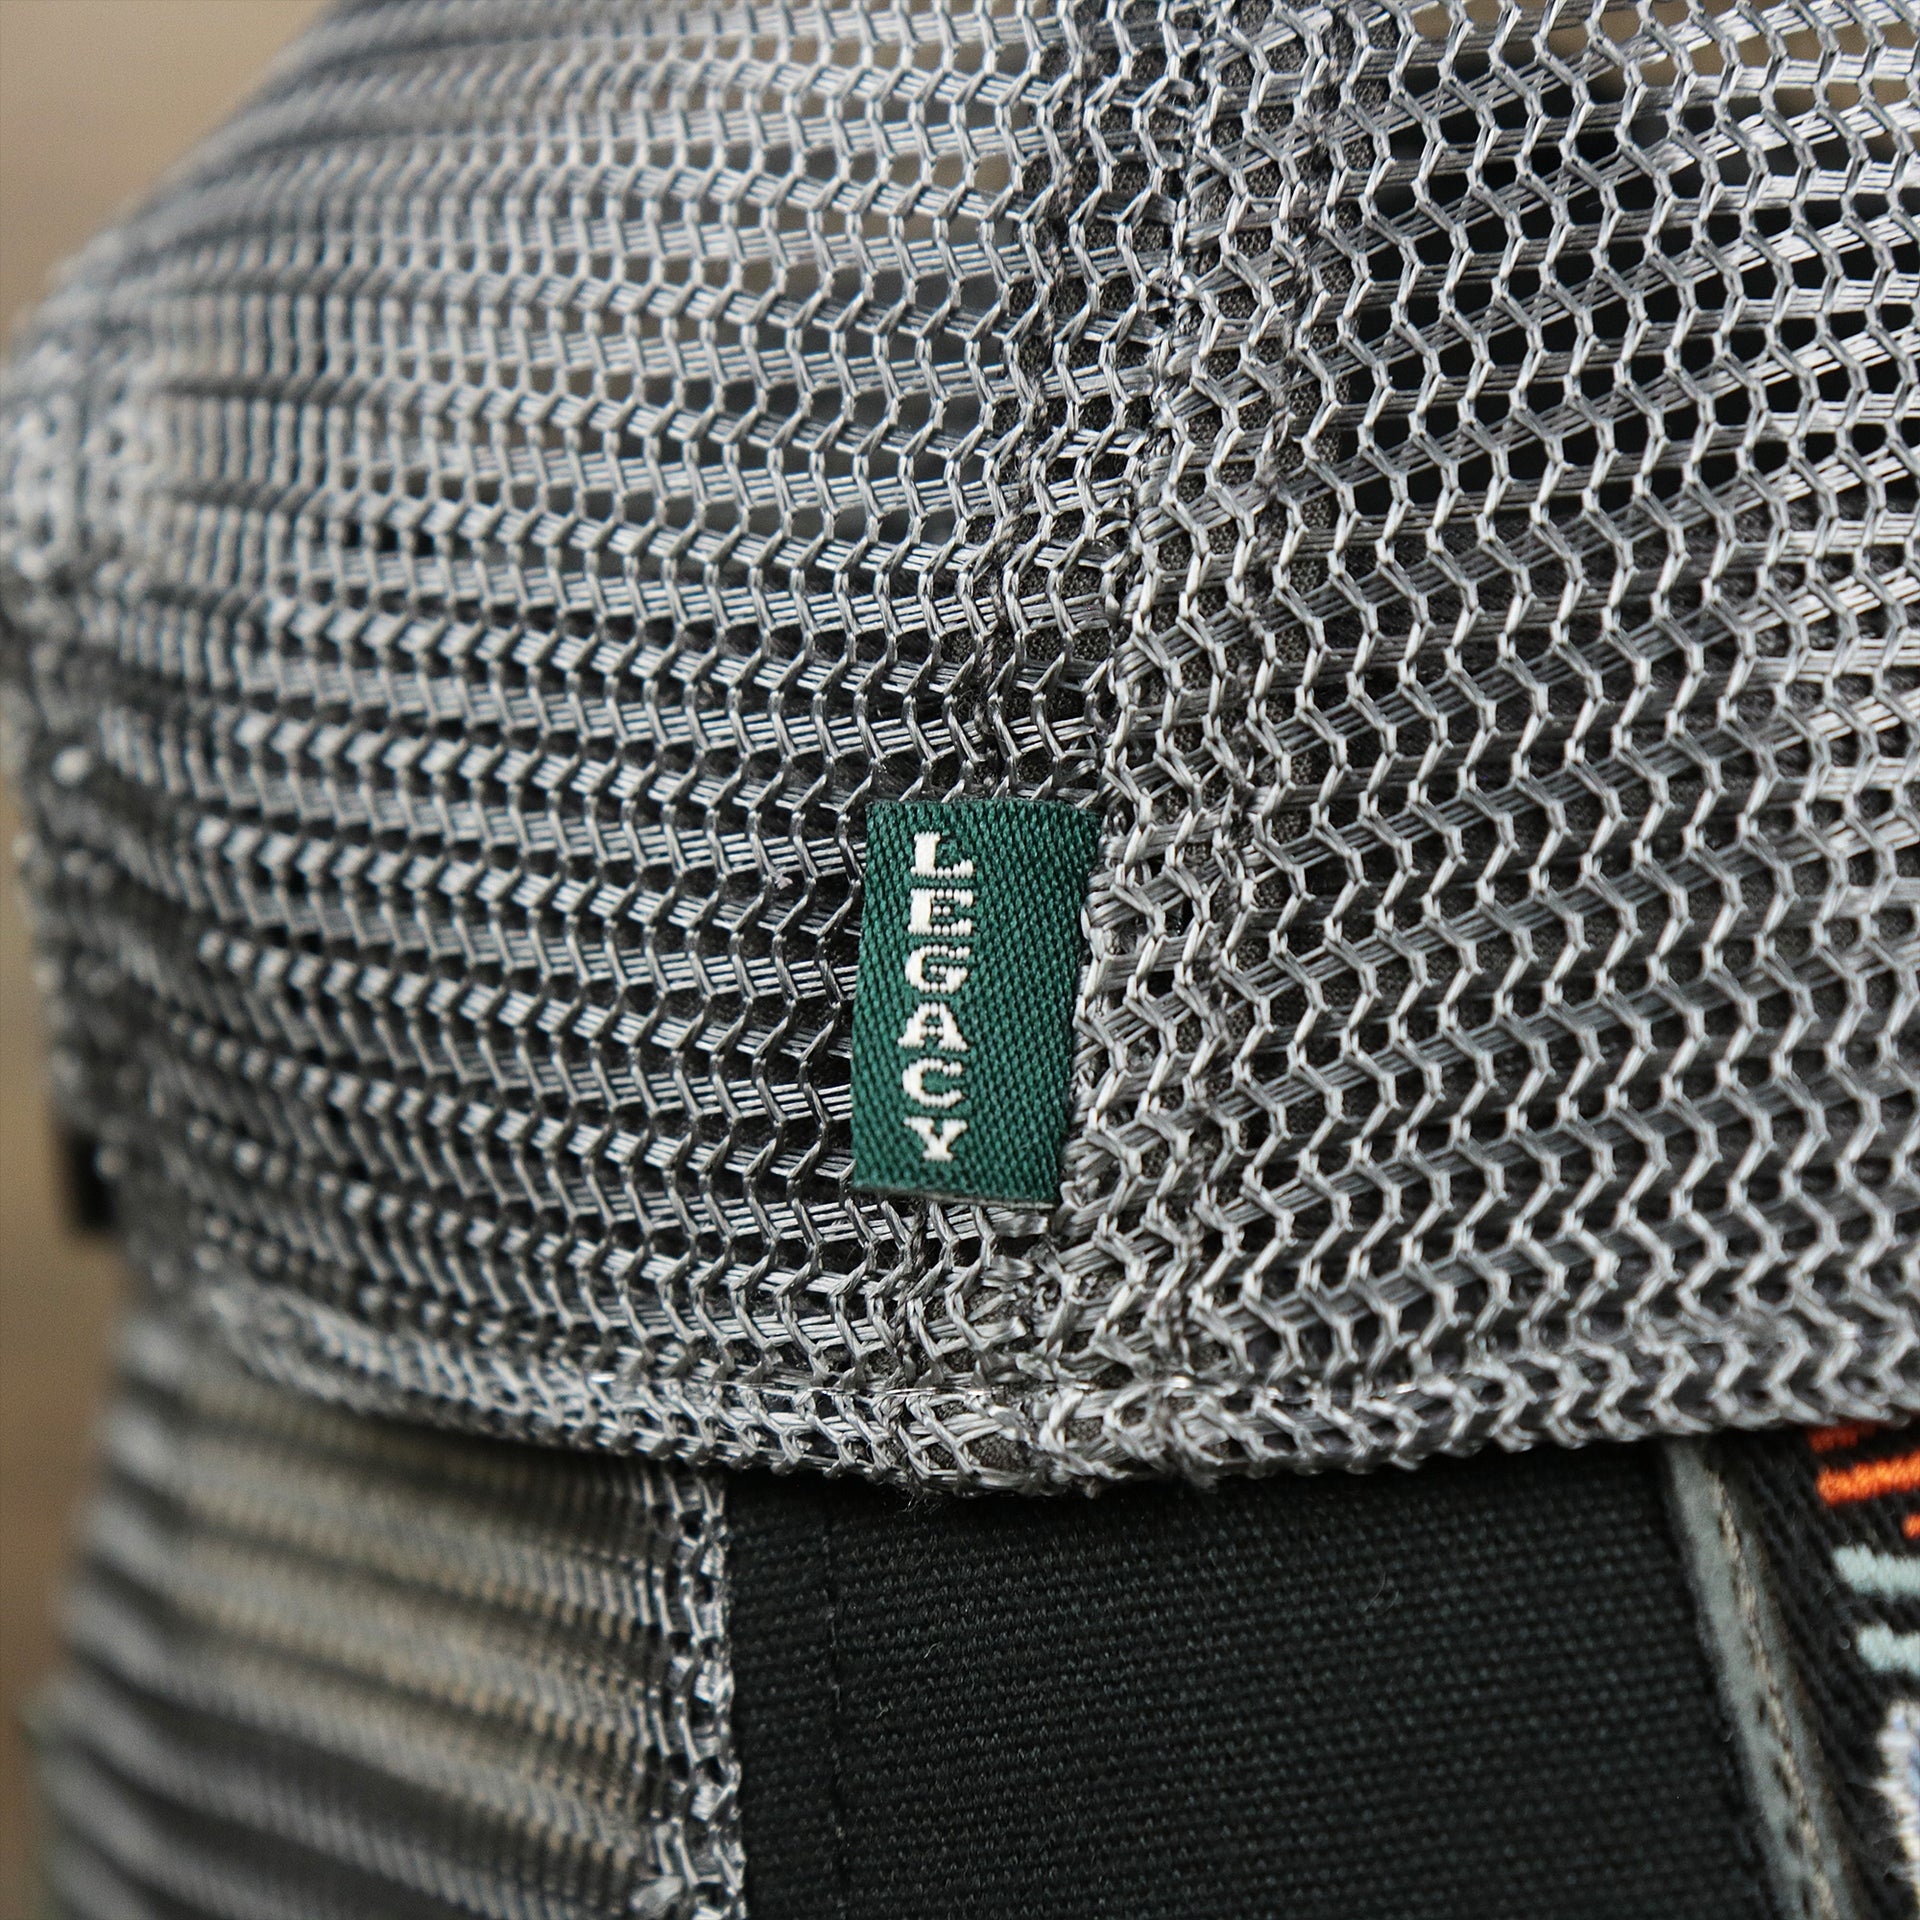 The Green Legacy Tag on the Youth New Jersey Ocean City Sunset Mesh Back Trucker Hat | Black And Grey Mesh Youth Trucker Hat